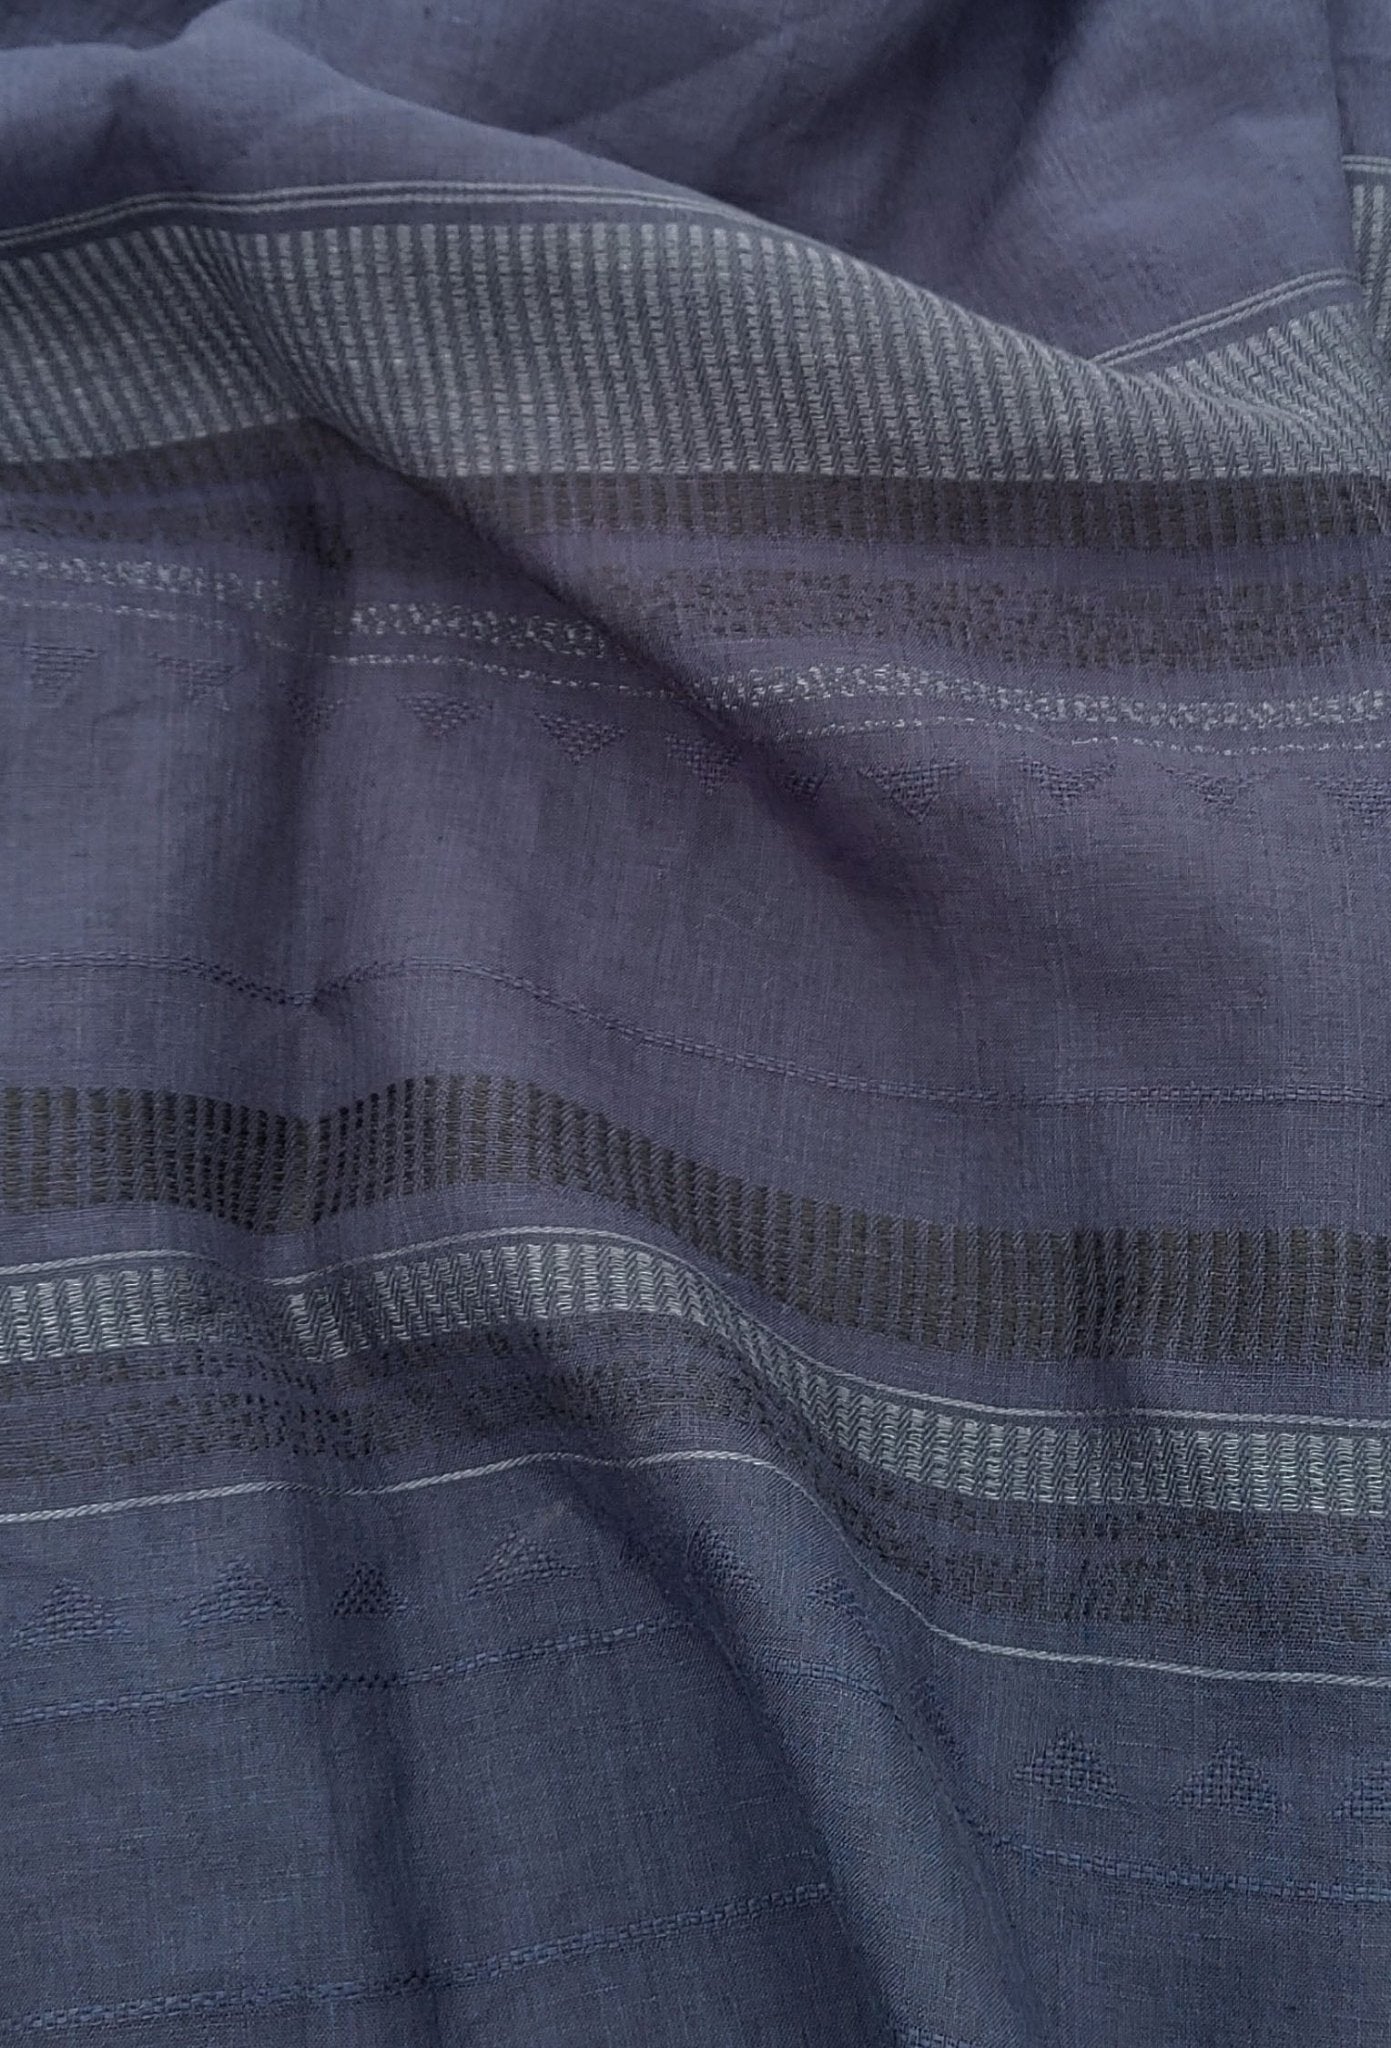 100% Linen Blend Jacquard Fabric with Navy Horizontal Stripes and Unique Weaving Structure 4883 - The Linen Lab - Navy